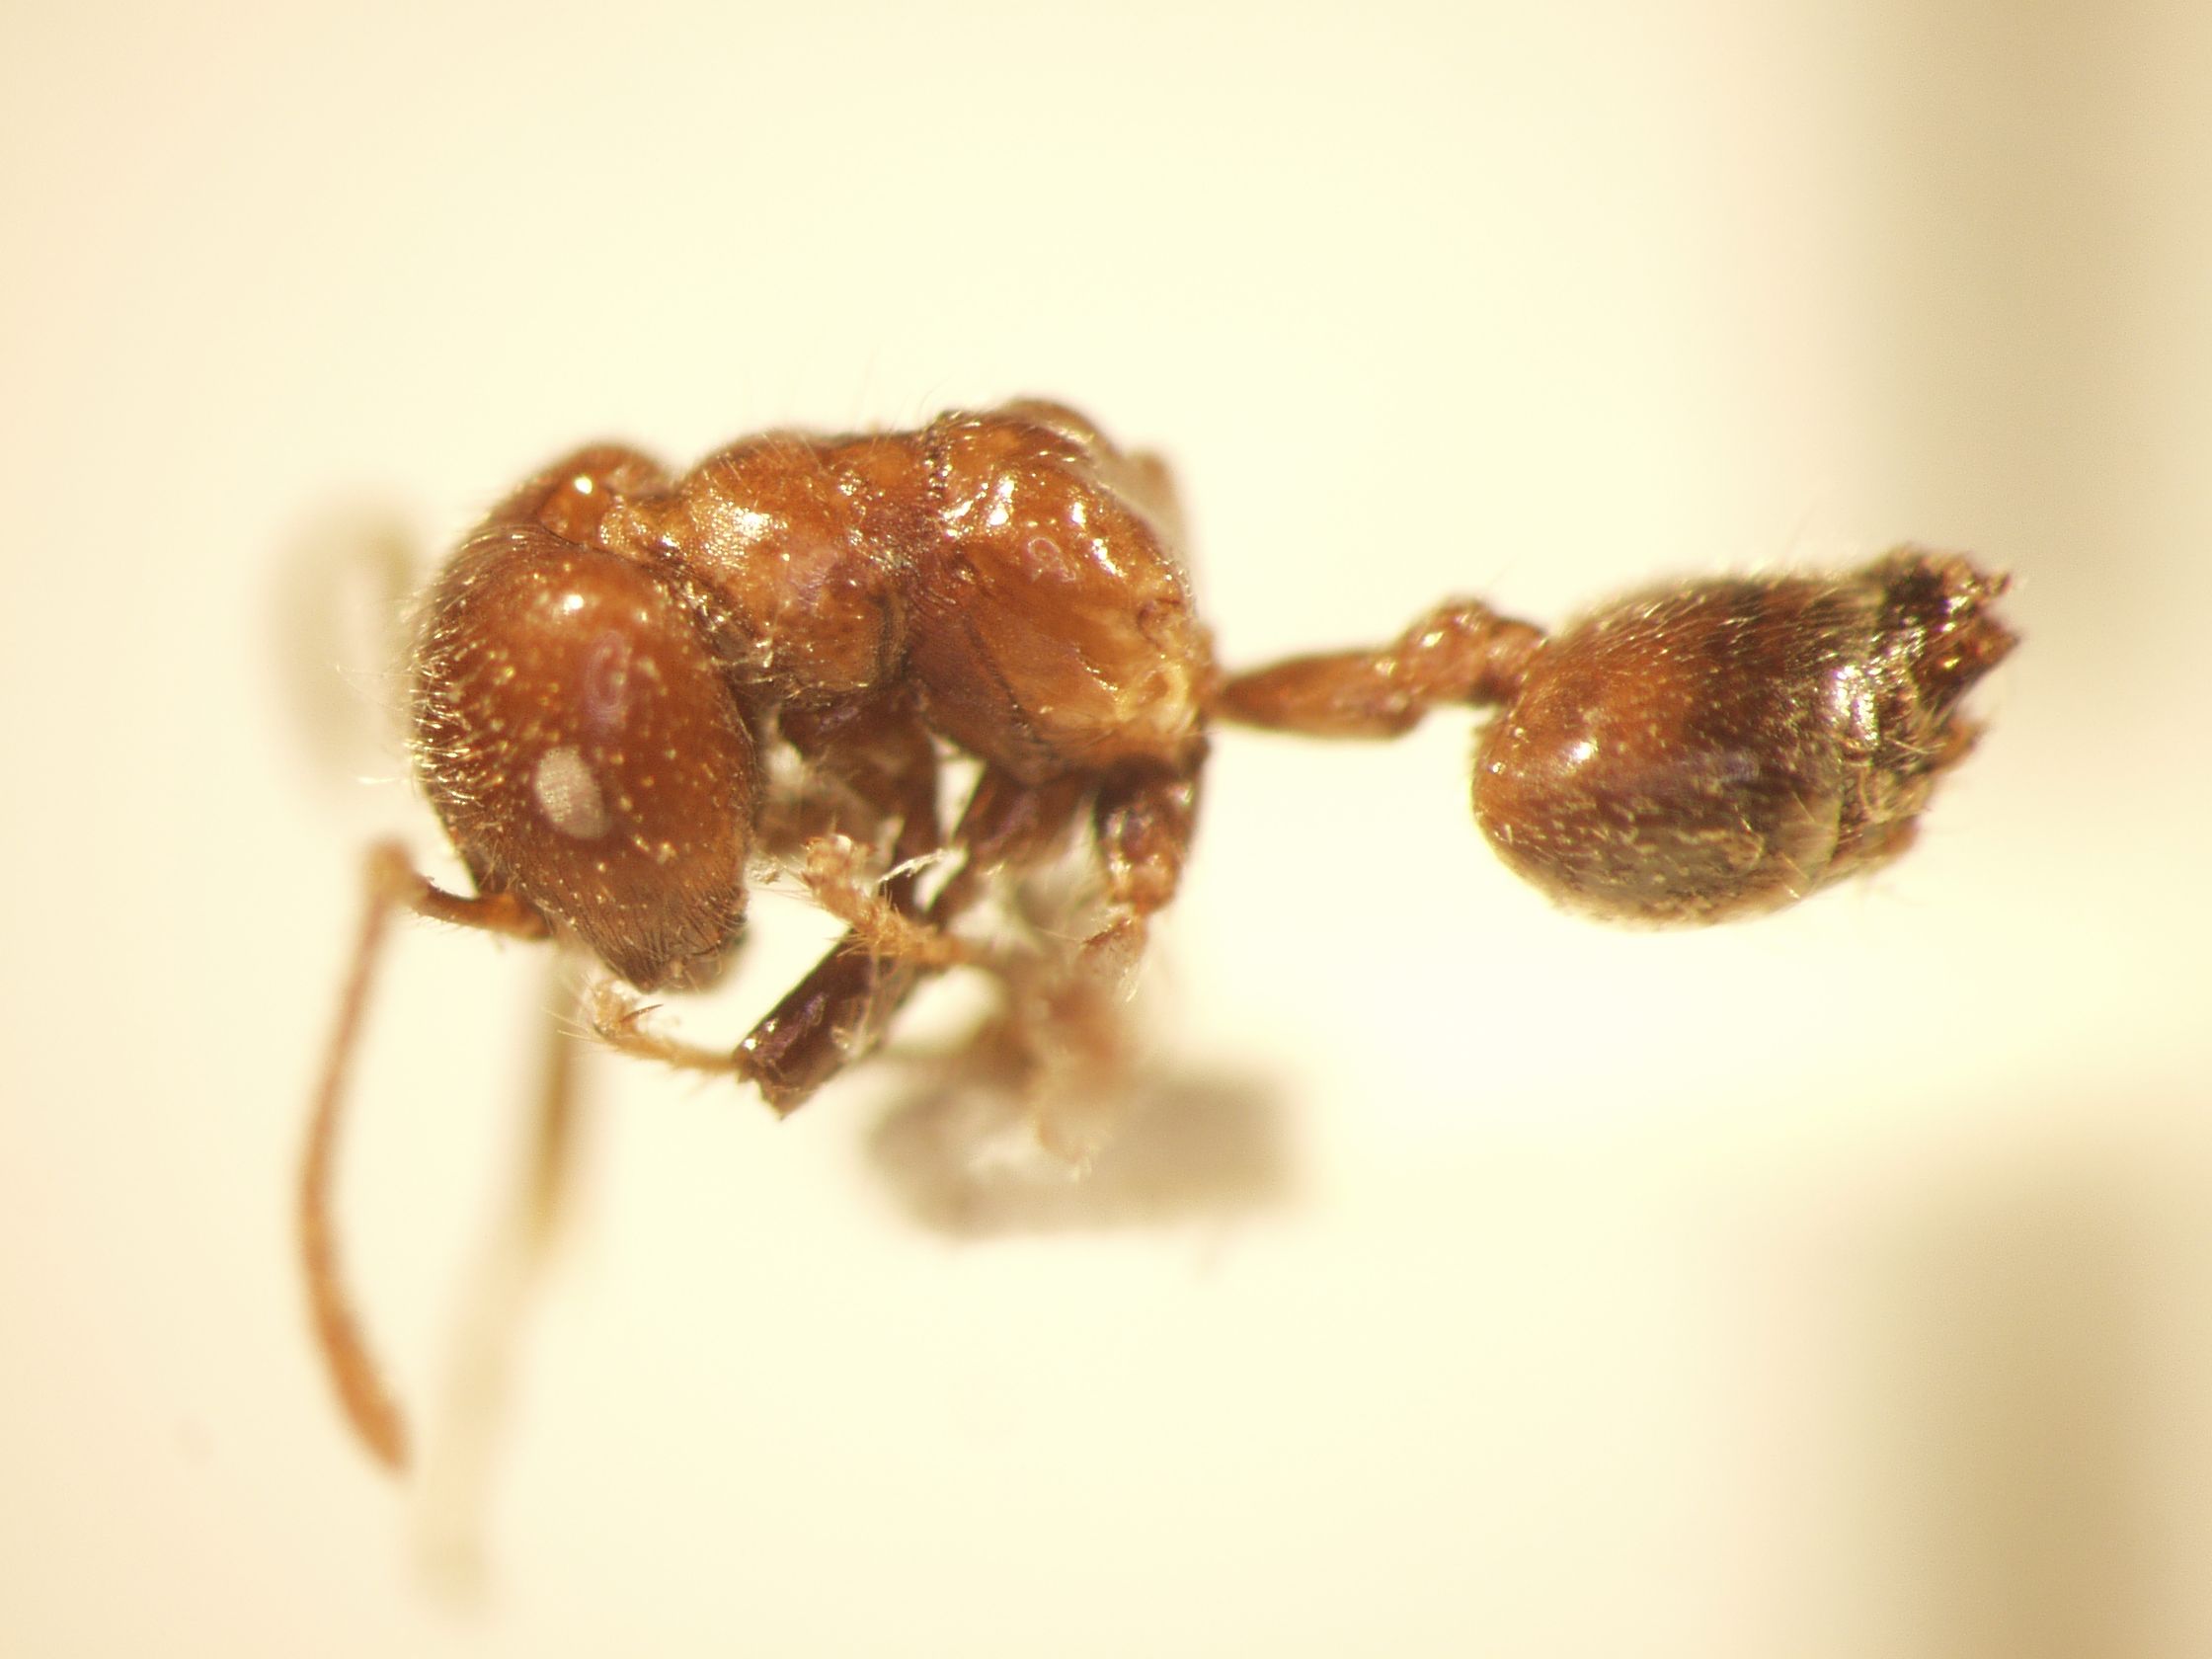 Crematogaster 6 lateral